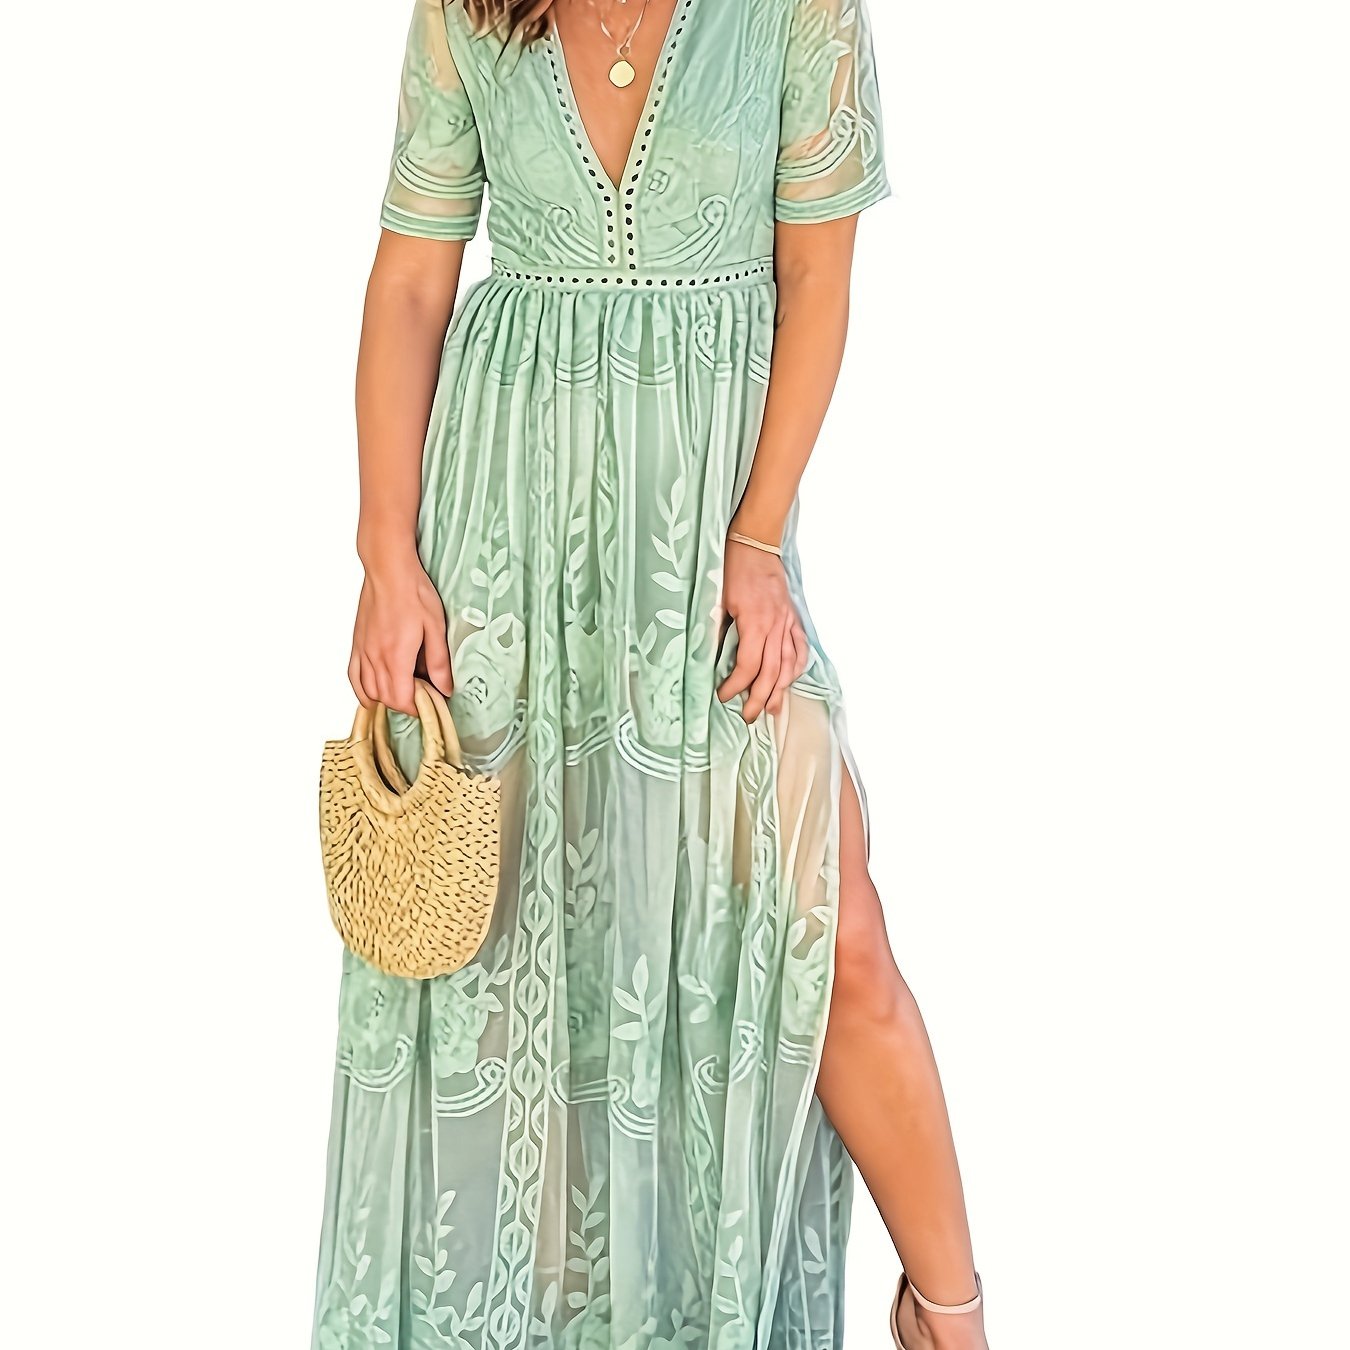 Women's Casual V-Neck Lace Long Dress Bohemian Bridesmaid Wedding Evening Dress With Slit, All Floral Lace, High Waist, Hollowed Out Simple And Elegant Green Color